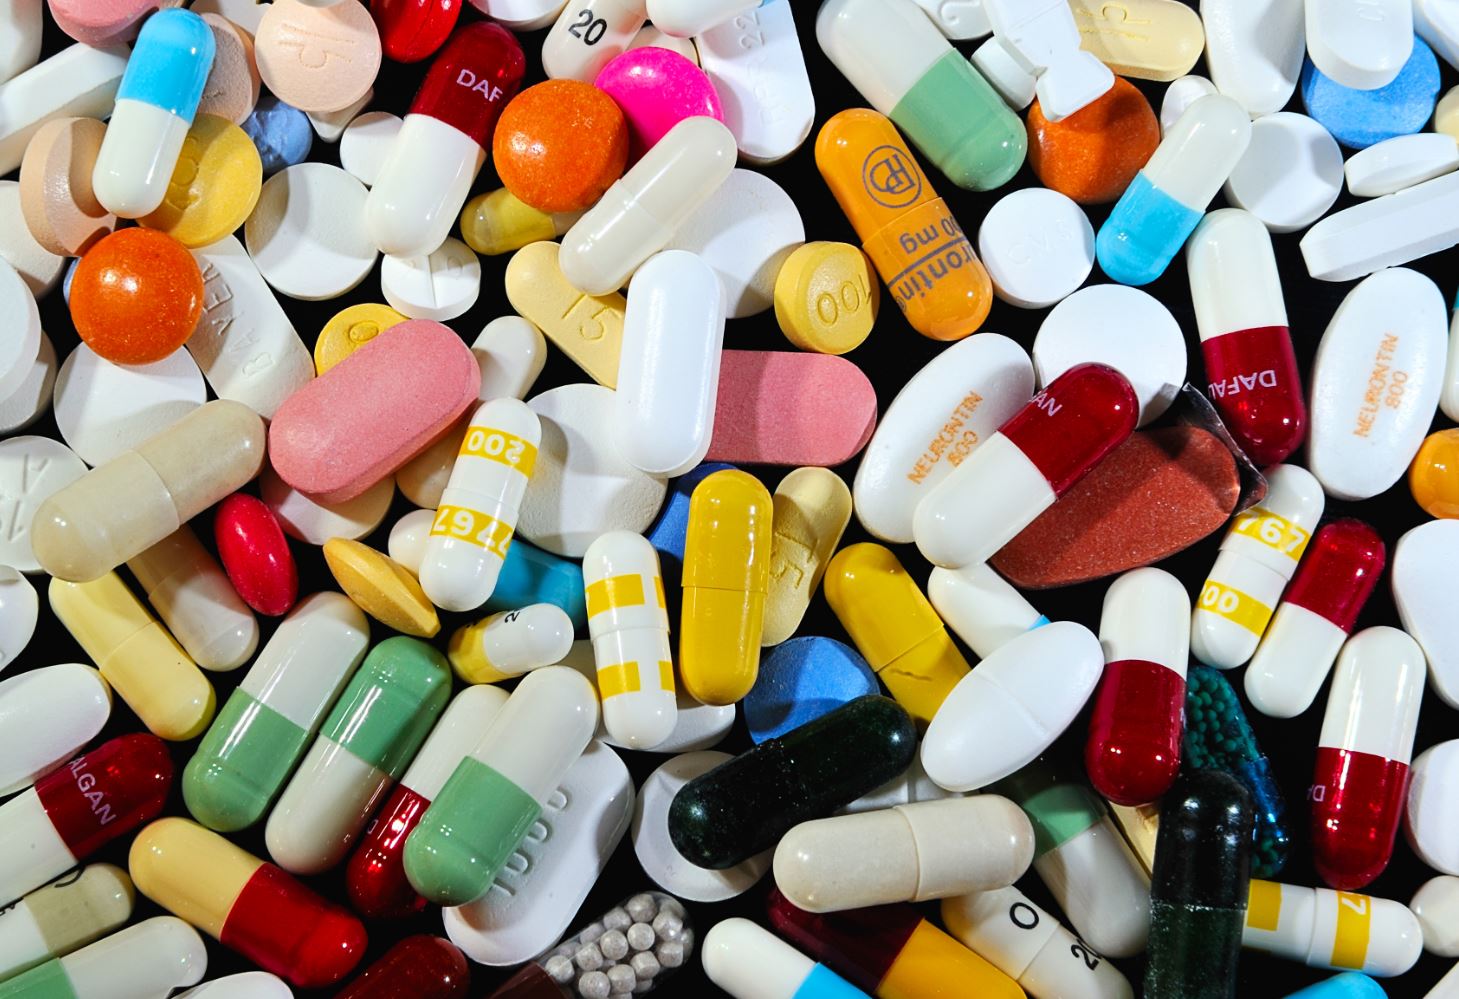 Pharma News - Disruption to medicines supply chain leads to growing concerns